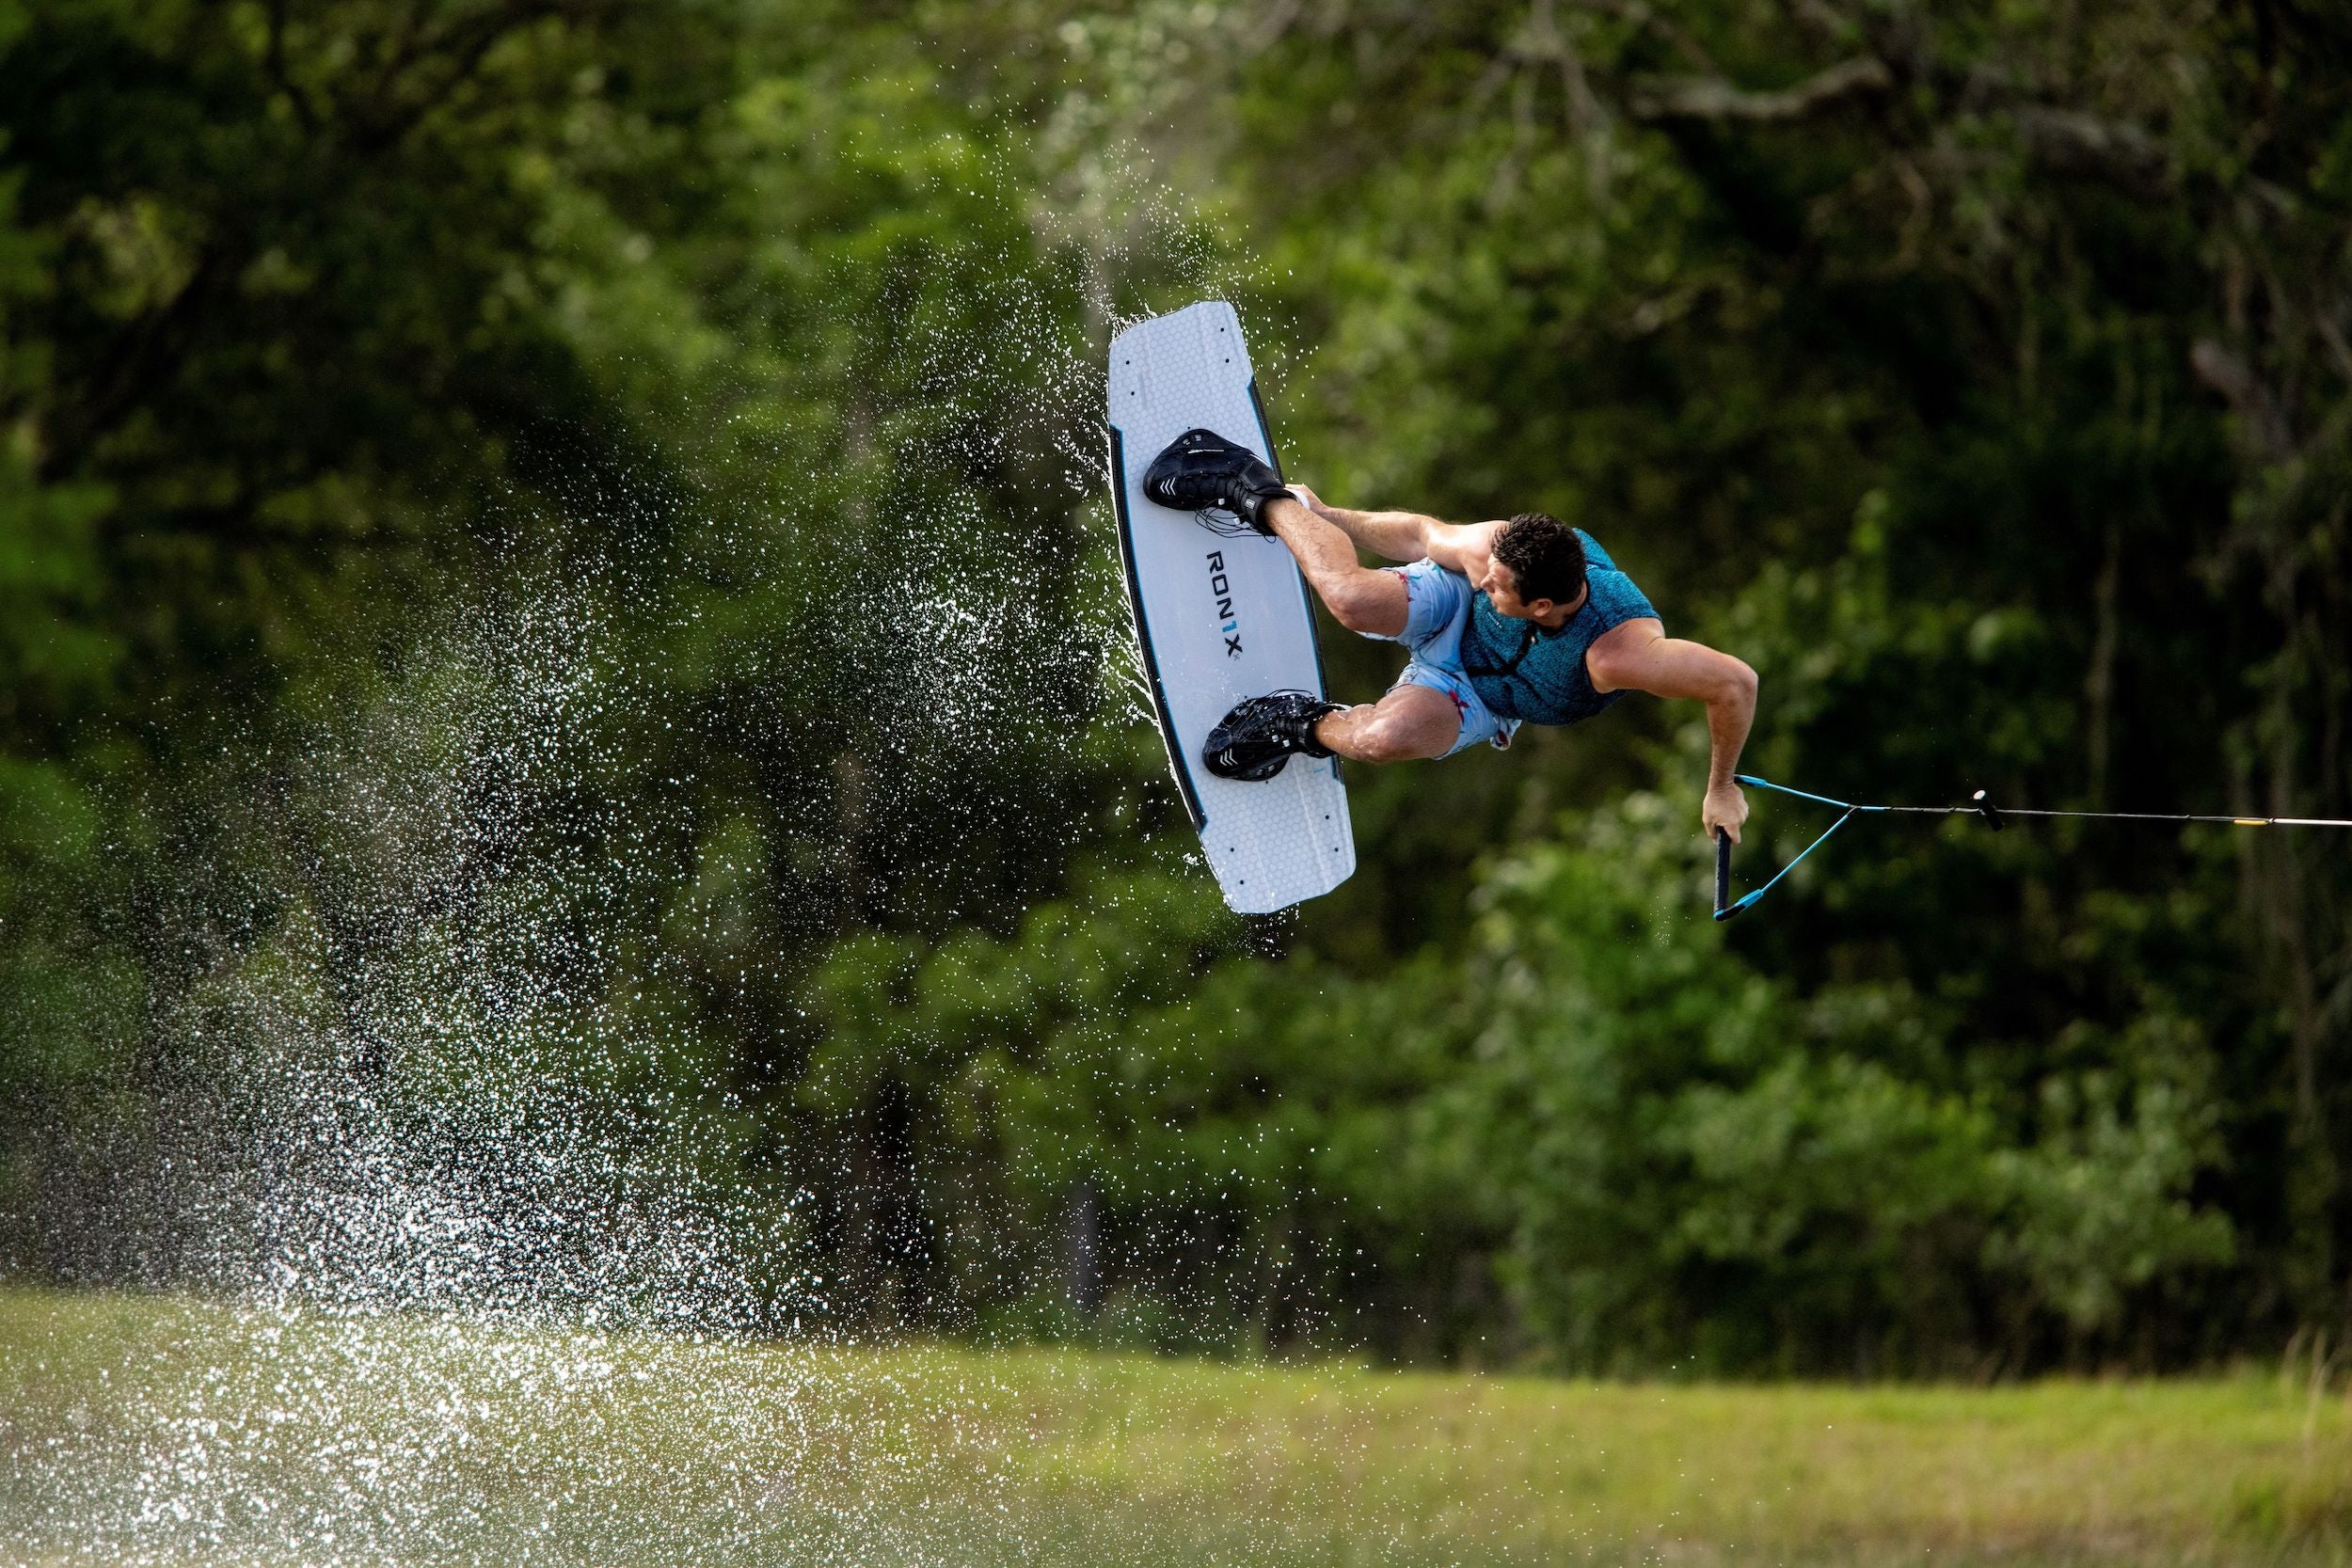 A person in the air doing a trick on a wakeboard with Ronix 2024 One Boots featuring a Cordura ballistic nylon upper and an Intuition+ heat moldable liner.